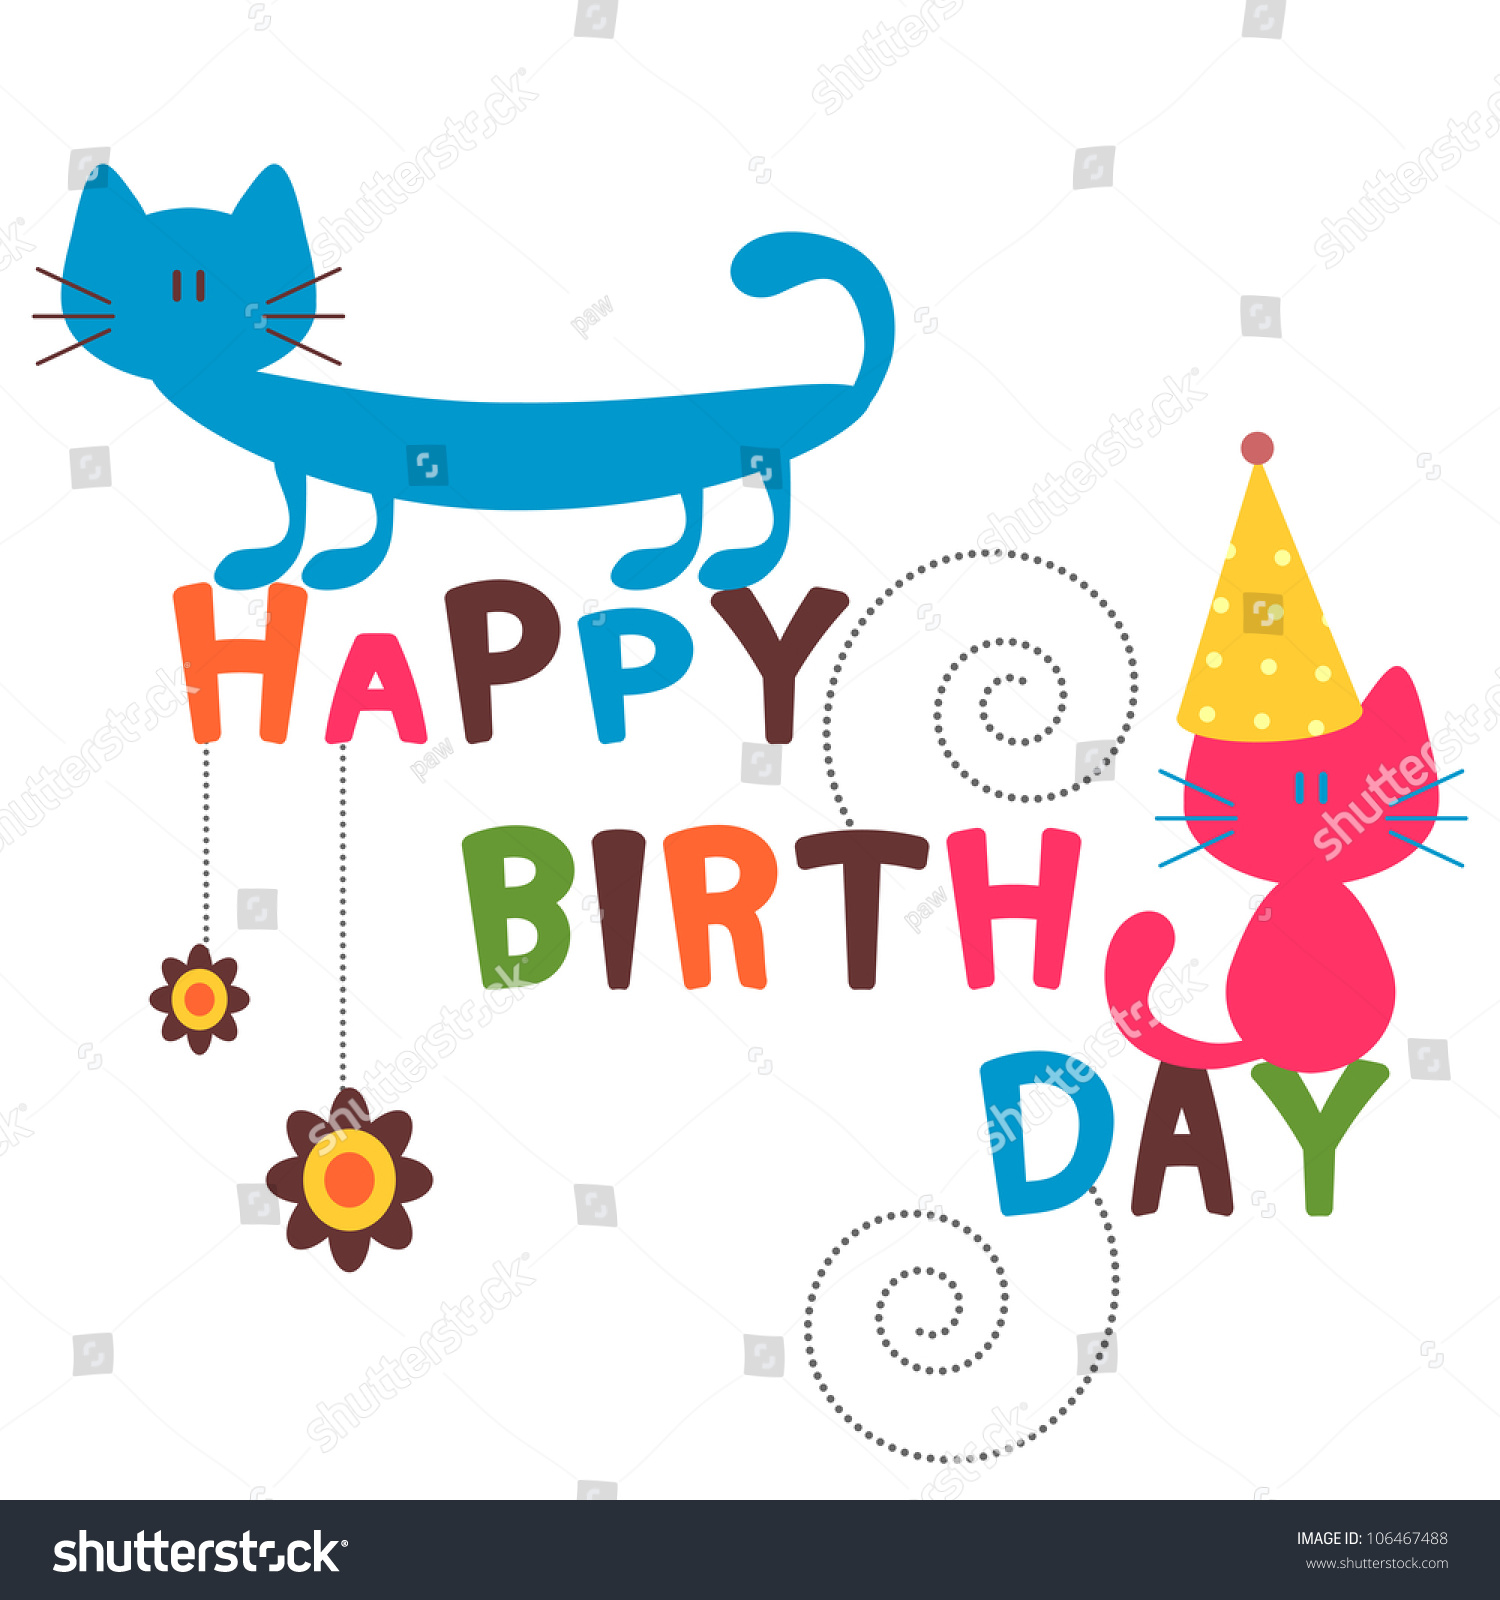 Download Happy Birthday Card Funny Cats Stock Vector 106467488 ...